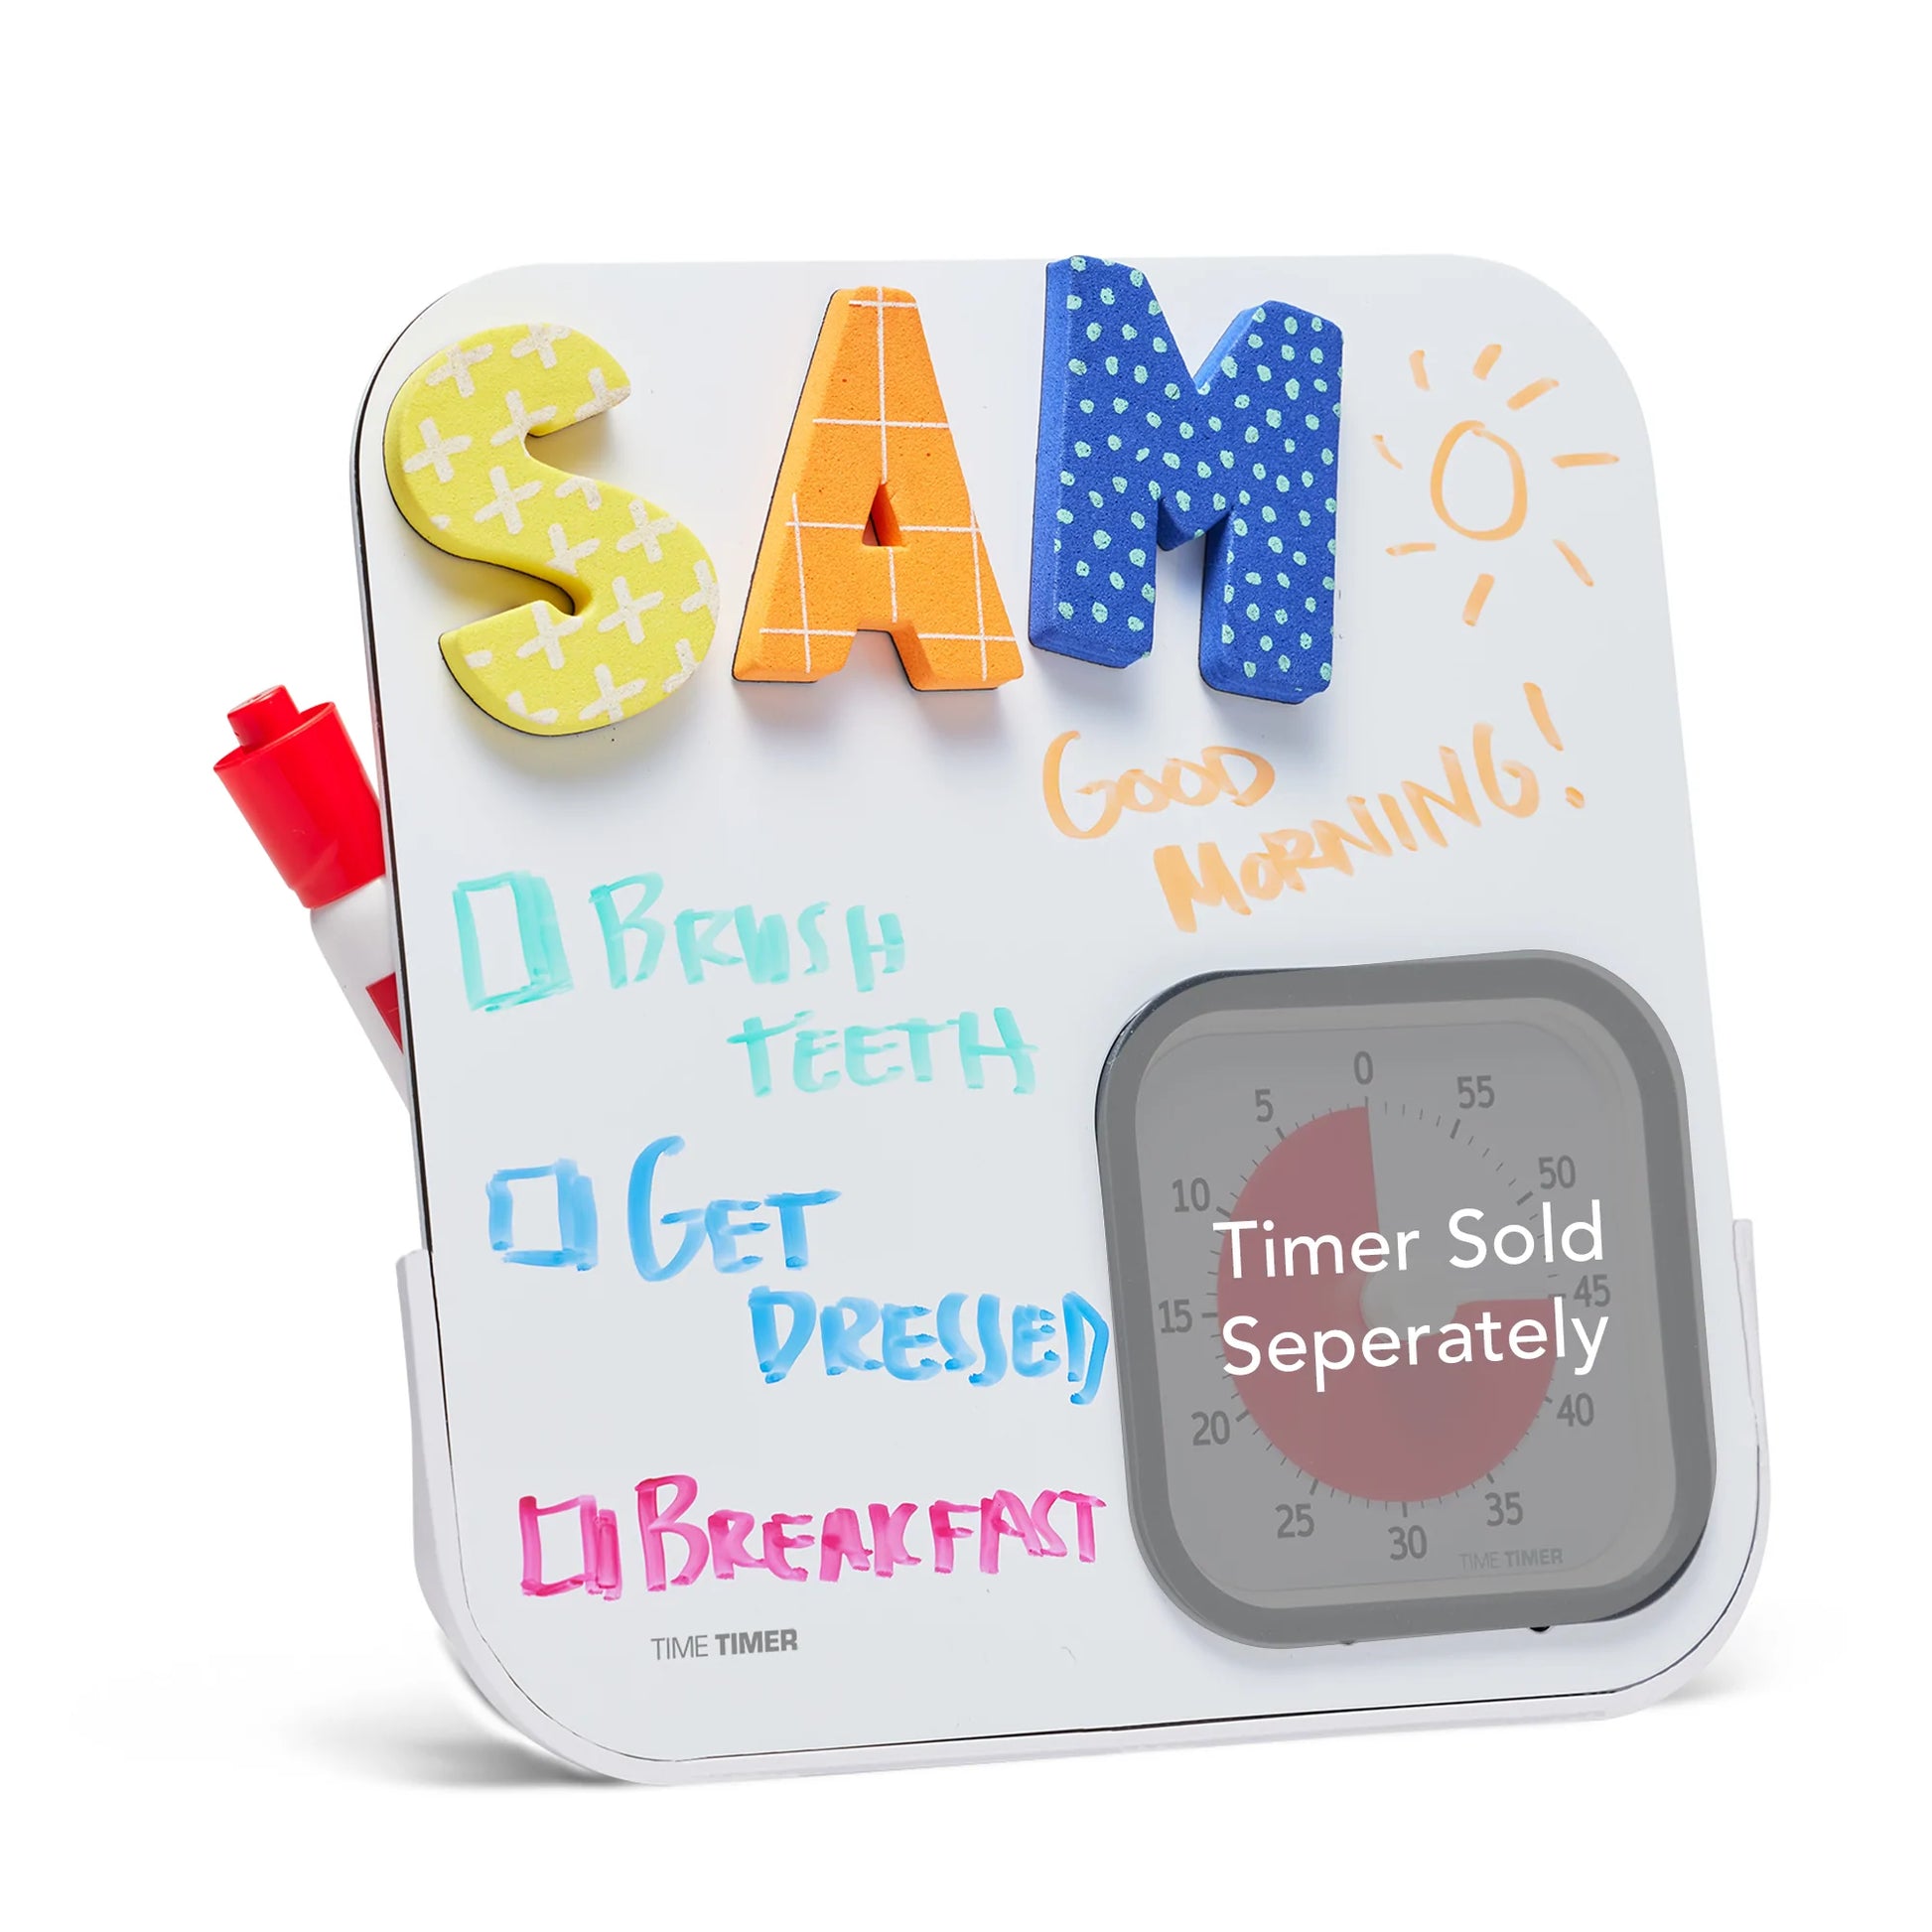 Time_Timer_Education_edition_dry_erase_board_with_SAM_brush_teeth_get_dressed_breakfast_written_on_it_timer_set_for_45_minutes_timer_sold_seperately